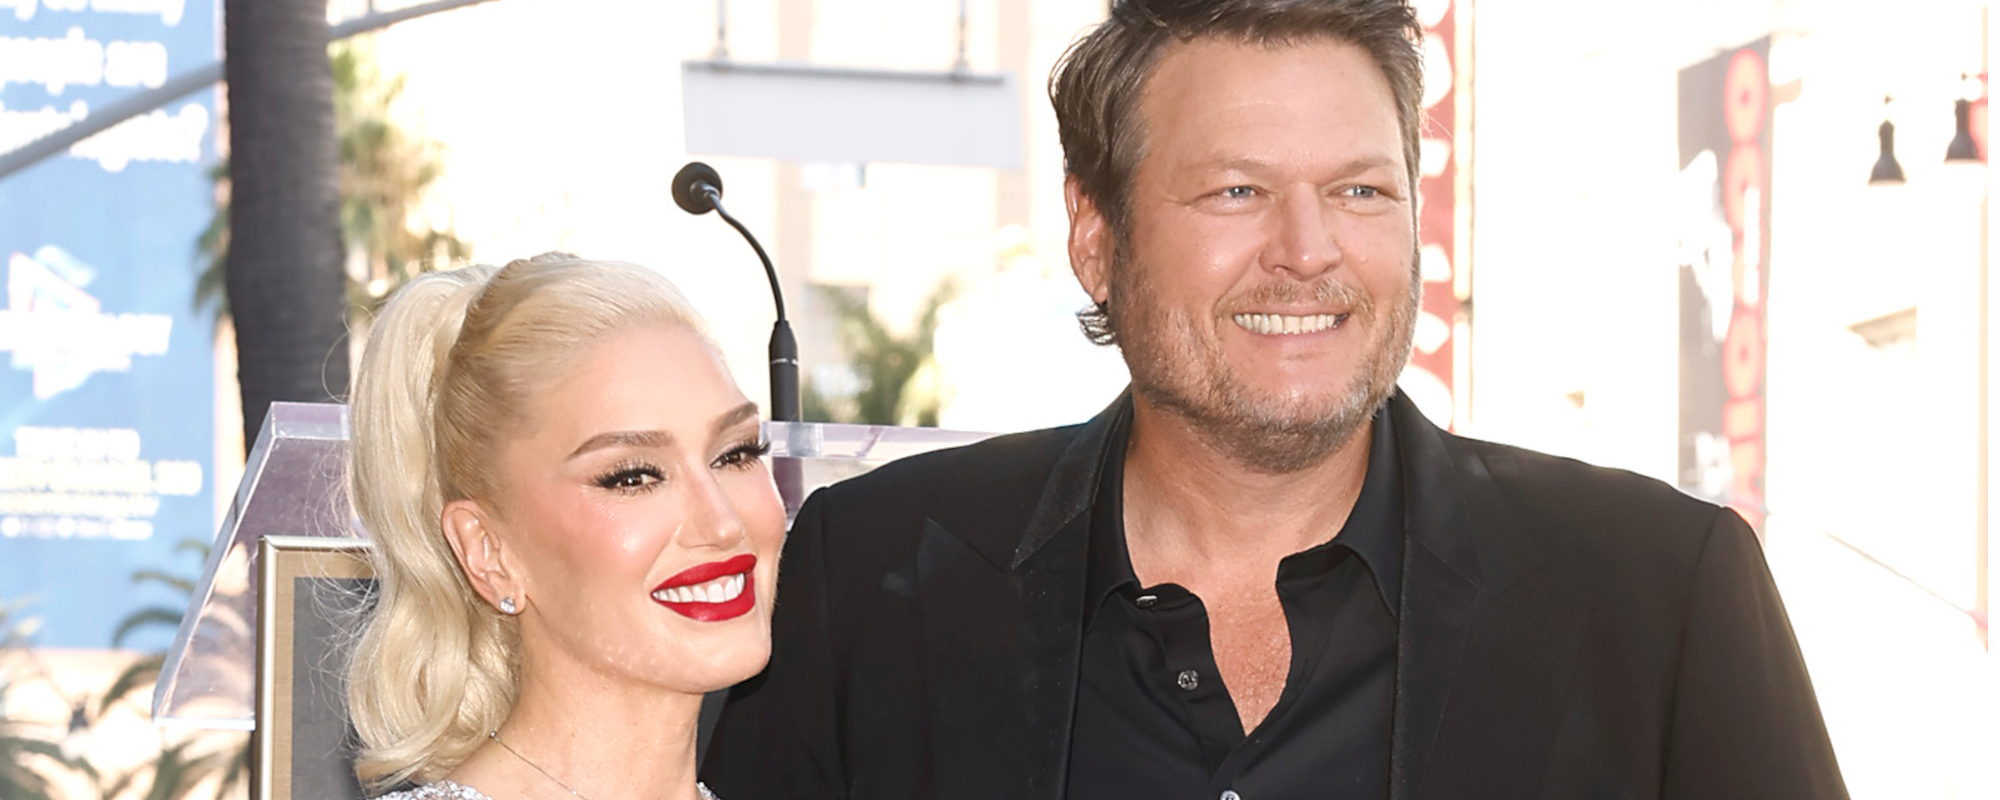 Blake Shelton Staggers Through Downtown Nashville in Santa Suit, Spends Christmas Weekend Skiing with Gwen Stefani